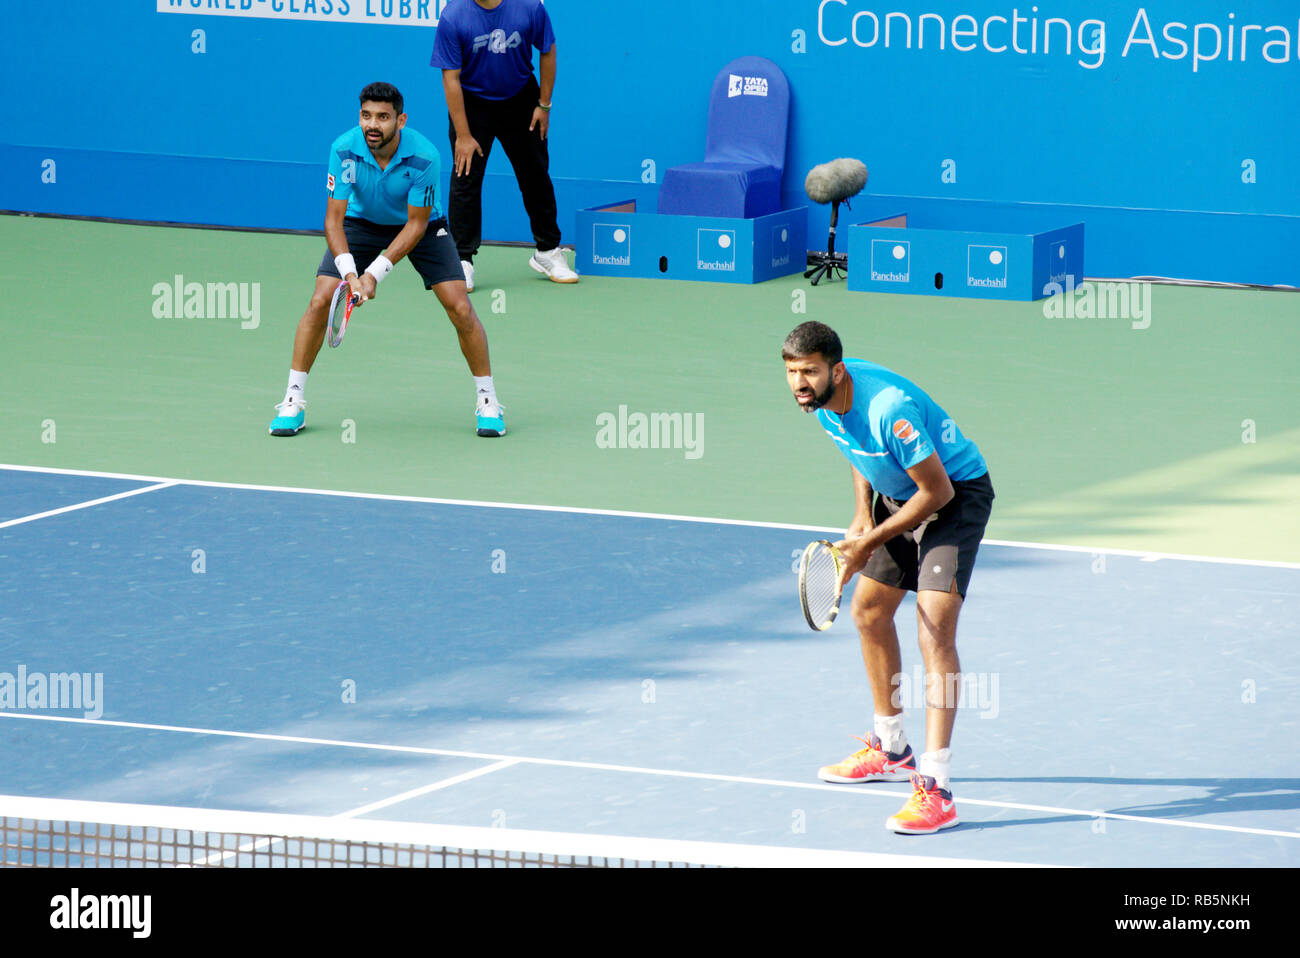 Pune, India. 5th January 2019. Divij Sharan and Rohan Bopanna in action in the doubles finals at Tata Open Maharashtra in Pune, India. Stock Photo